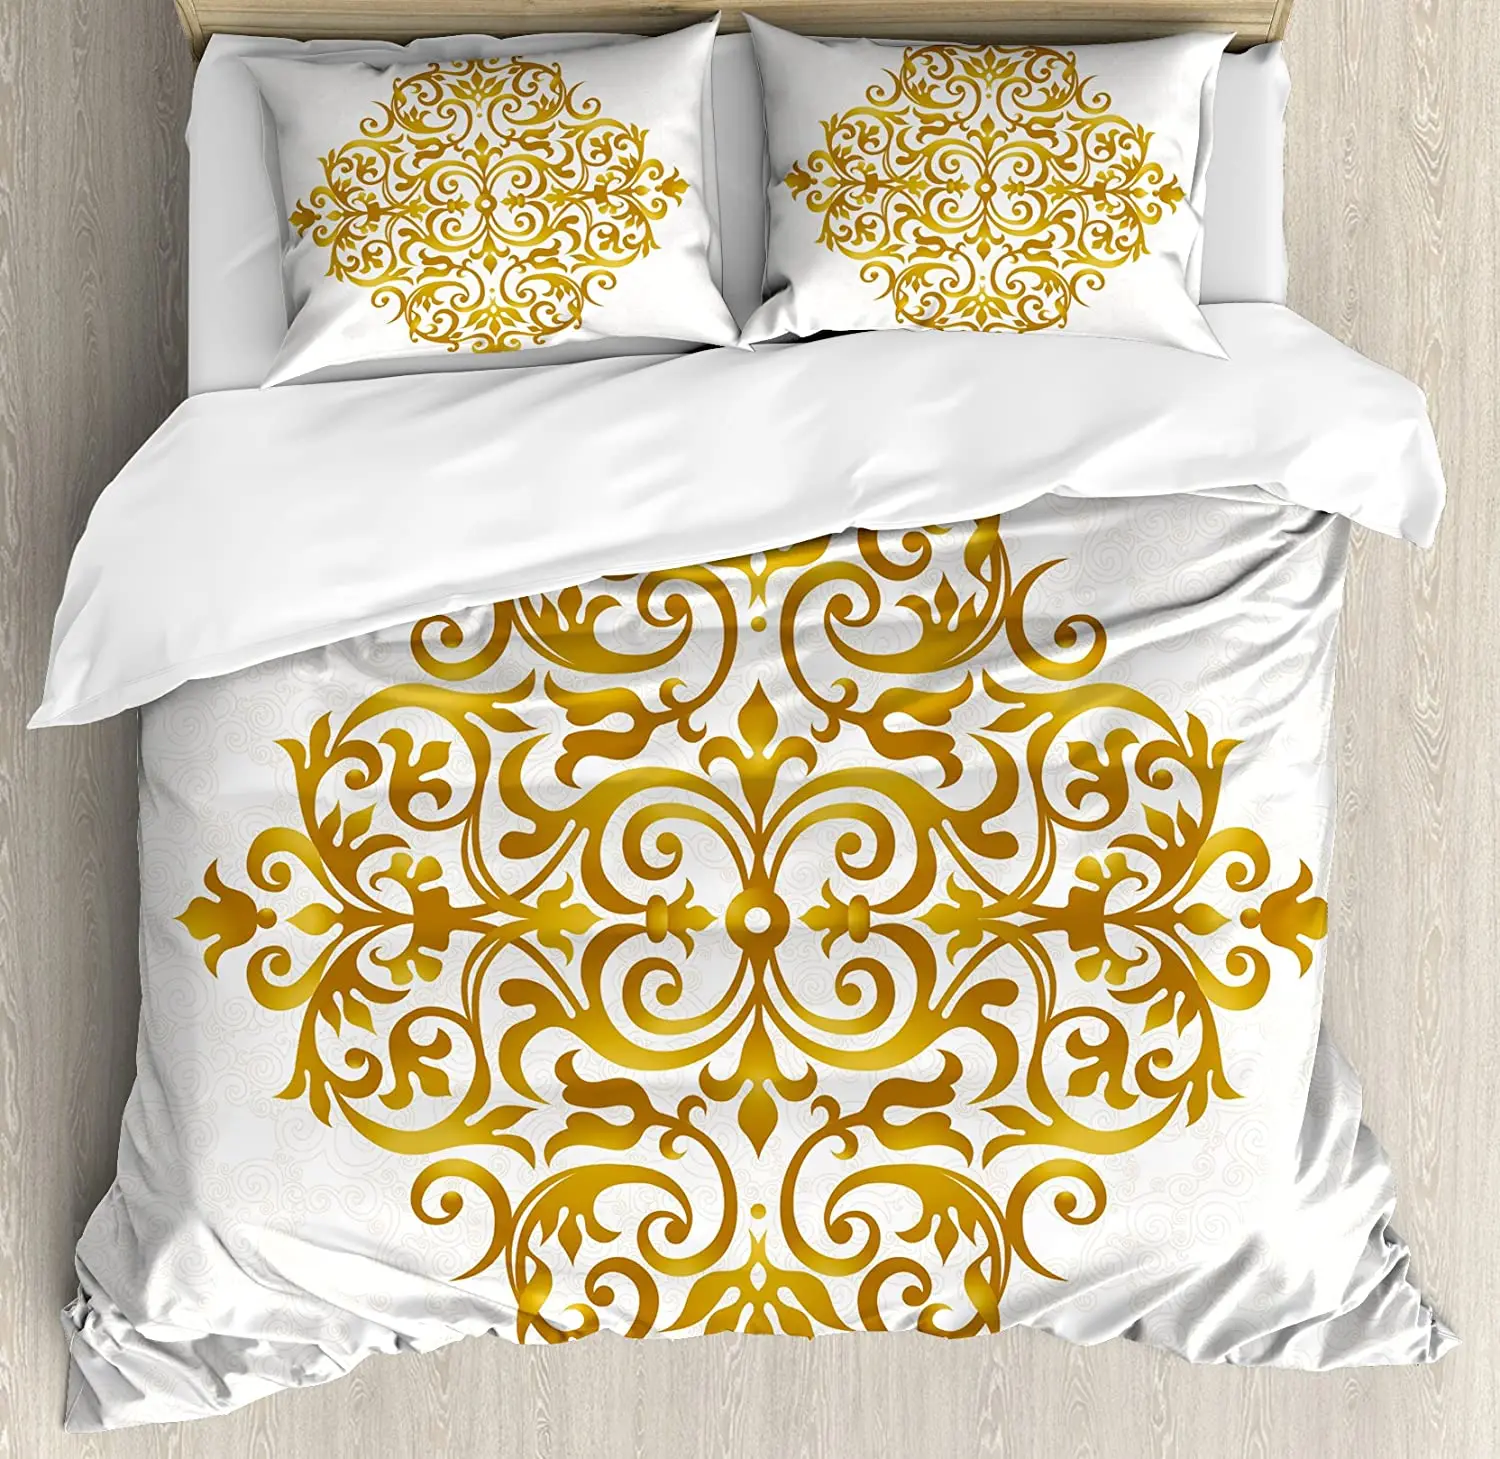 

Mandala Bedding Set For Bedroom Bed Home Victorian Style Traditional Filigree Inspired Ro Duvet Cover Quilt Cover And Pillowcase